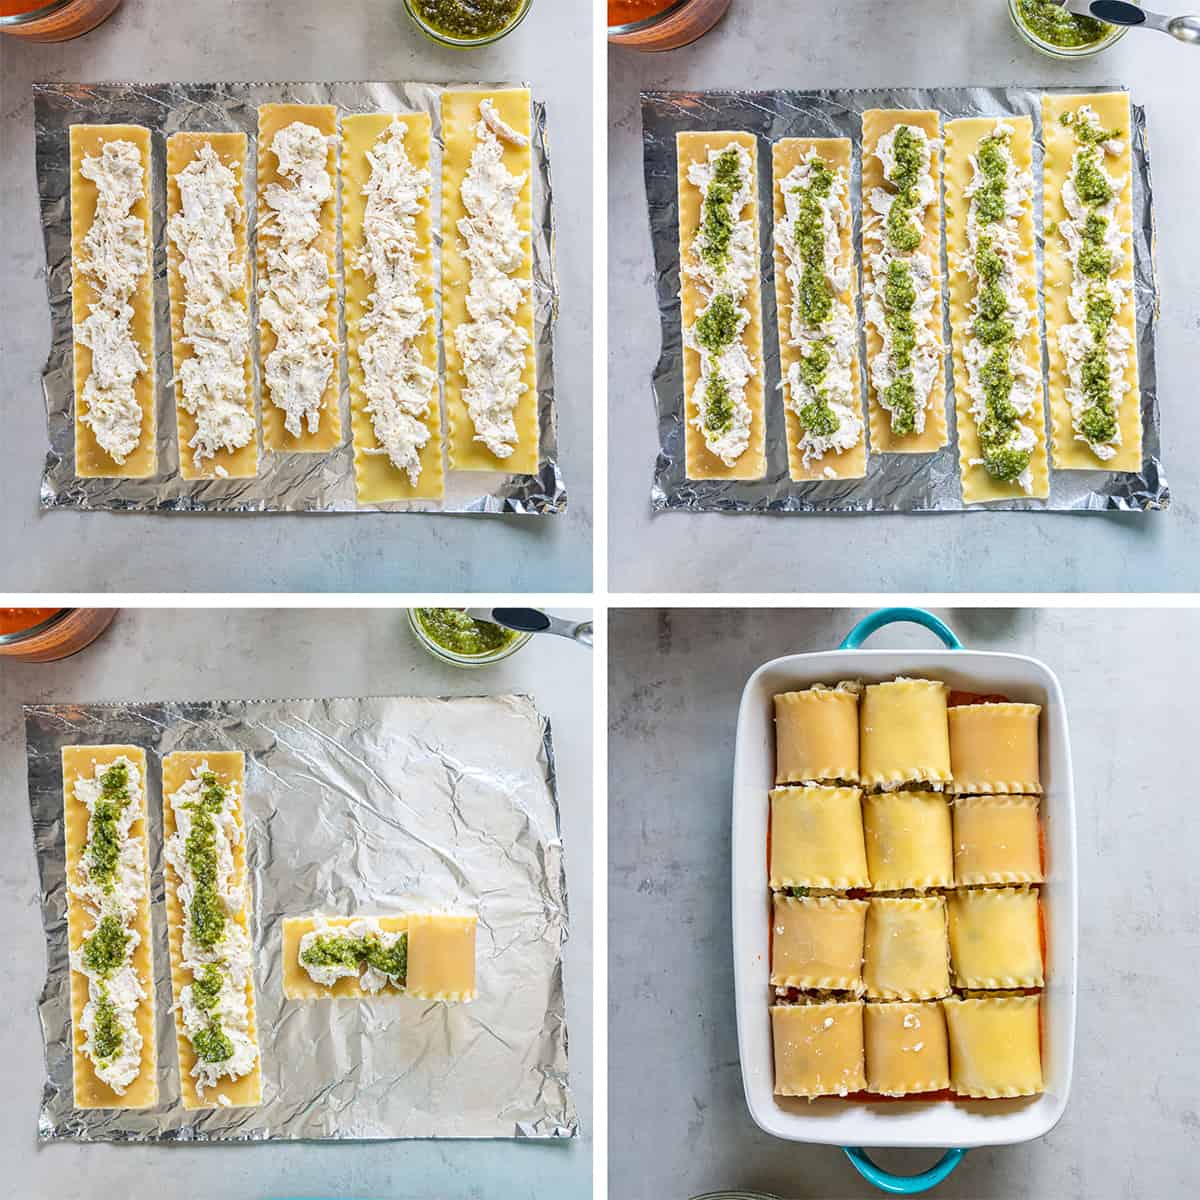 Four images of lasagna noodles layered with filling, rolled up, and placed in a baking dish.